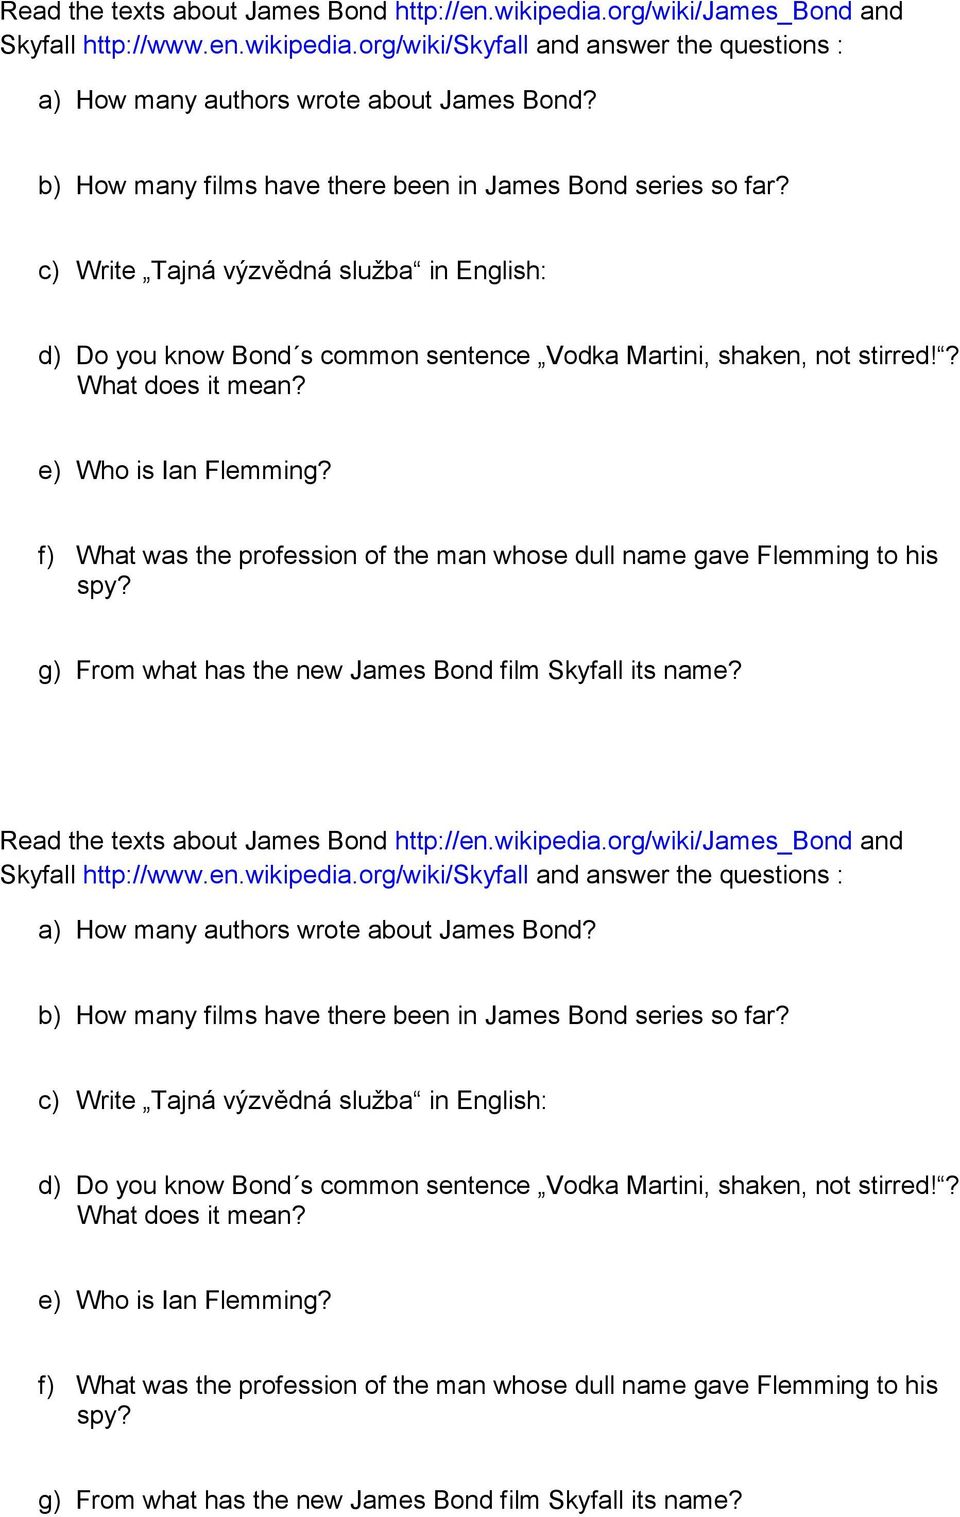 org/wiki/skyfall and answer the questions : org/wiki/skyfall and answer the